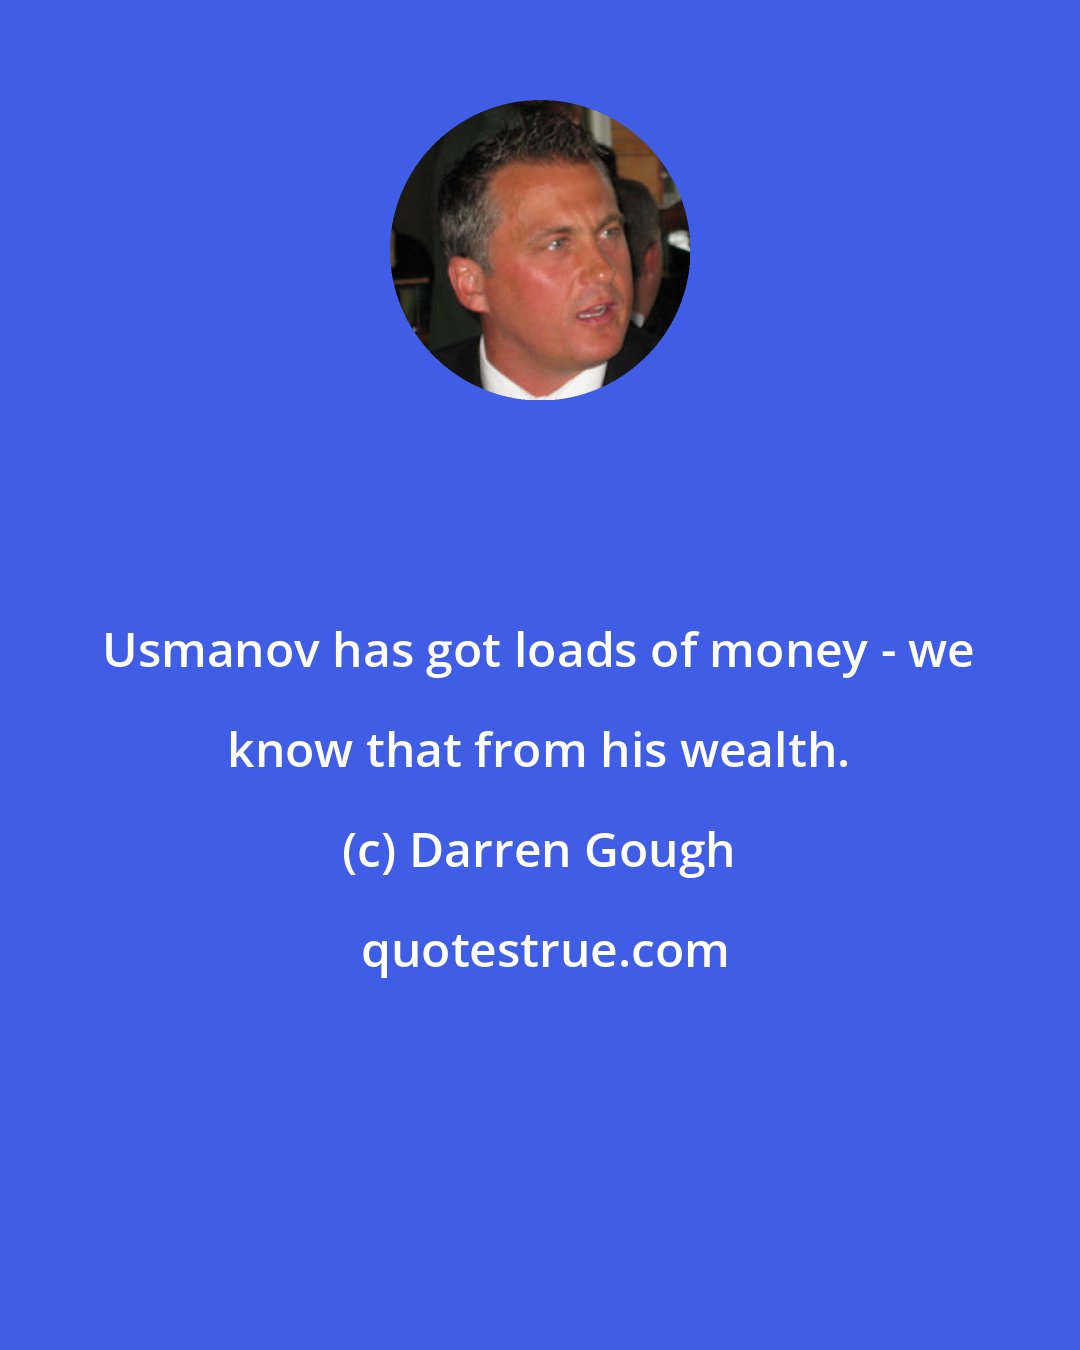 Darren Gough: Usmanov has got loads of money - we know that from his wealth.